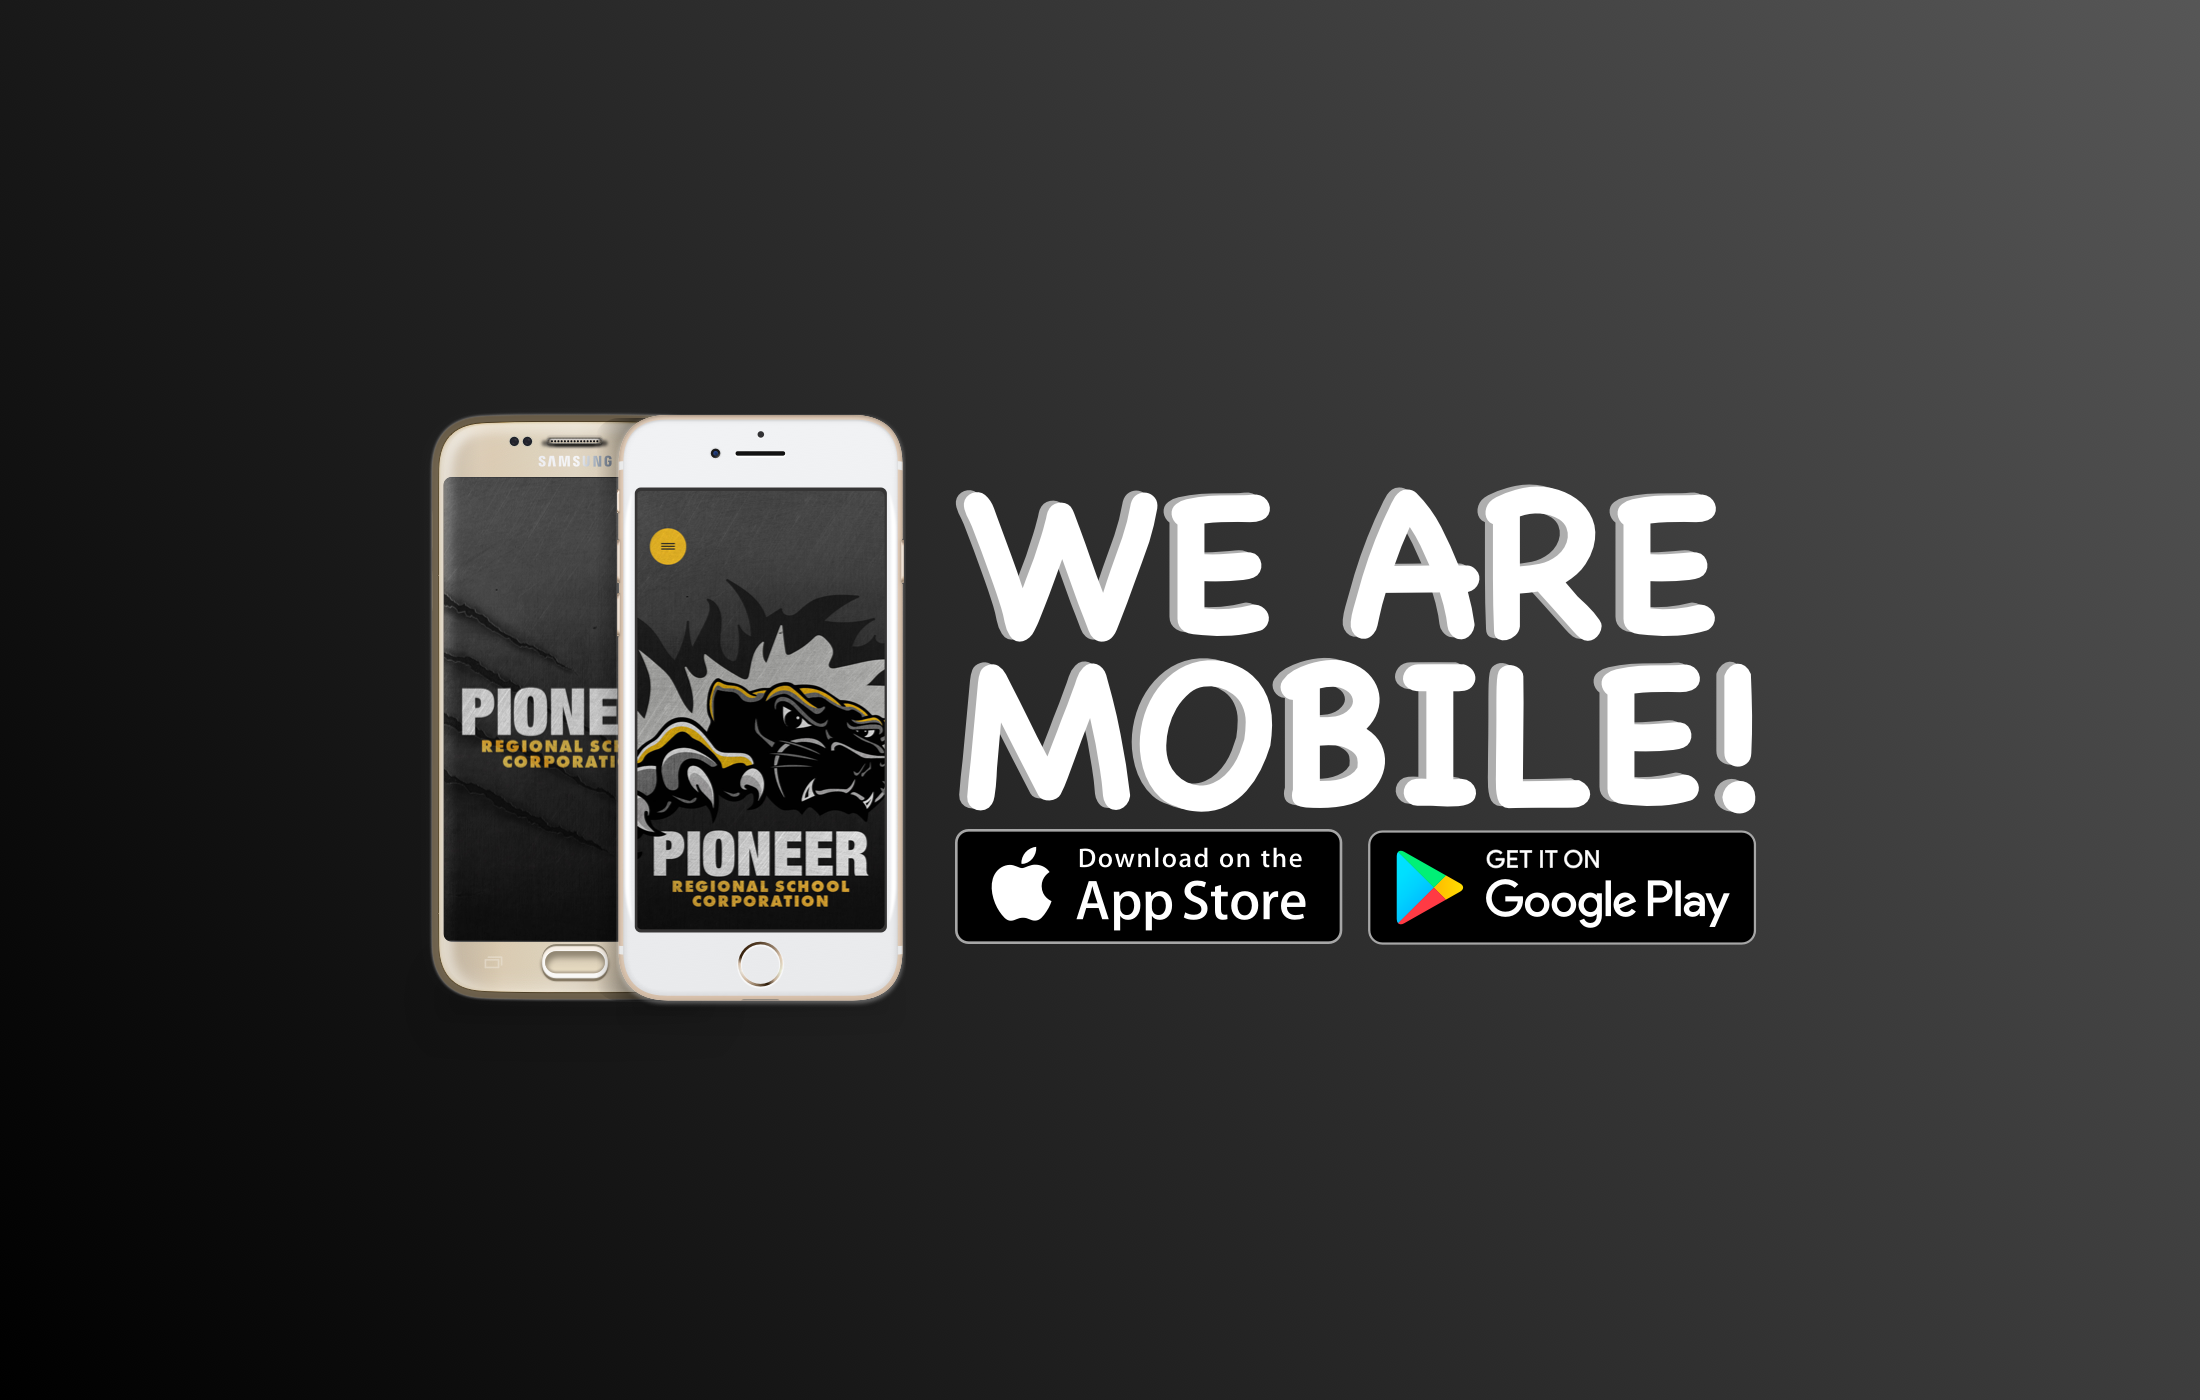 We are mobile!